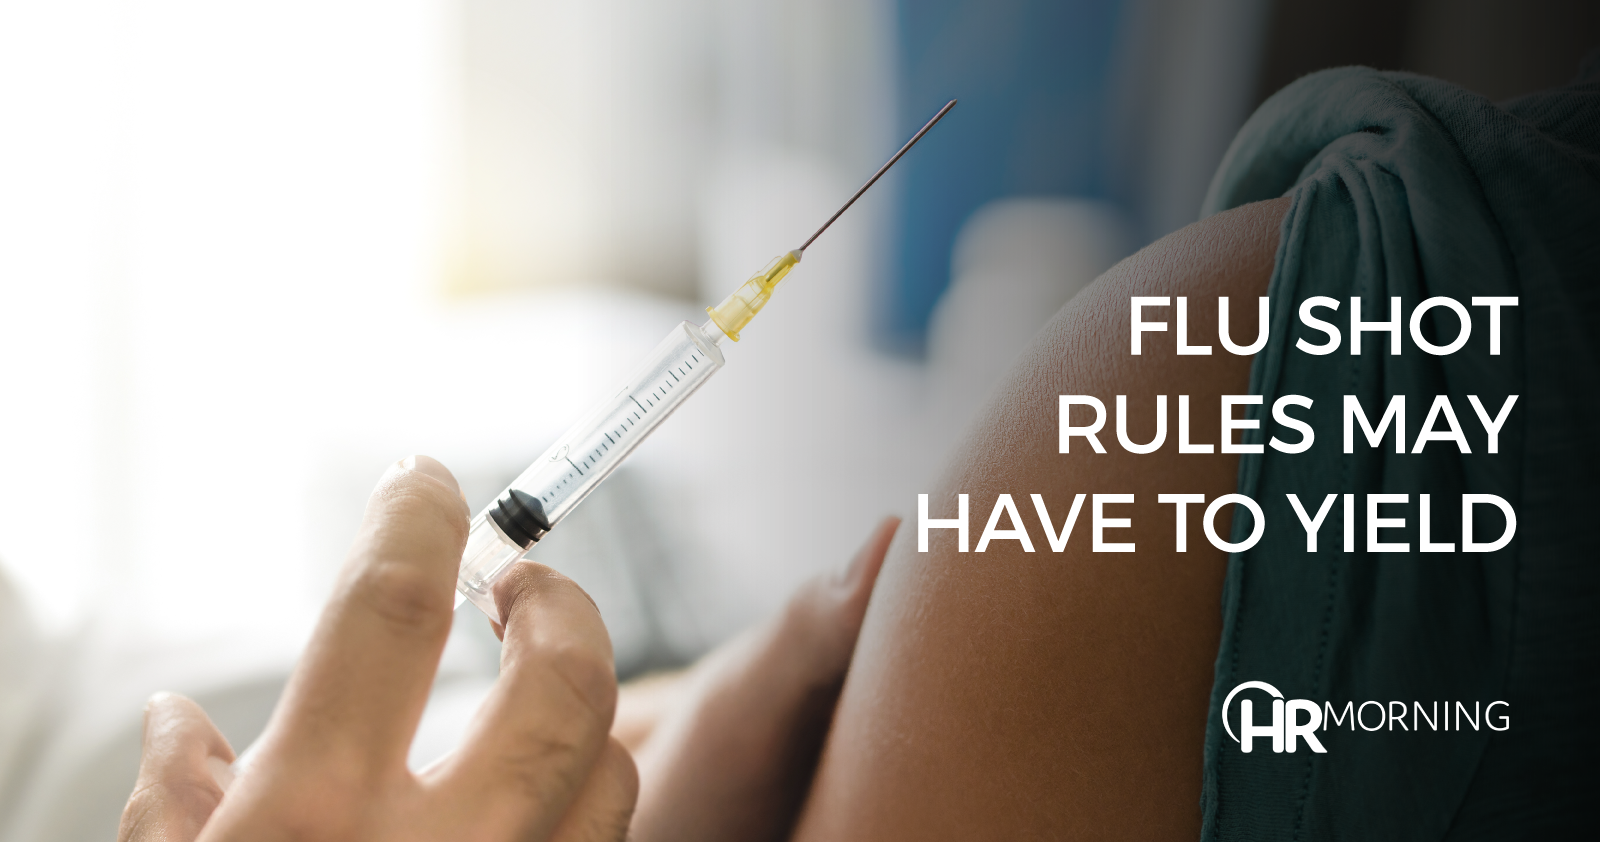 Flu shot rules may have to yield